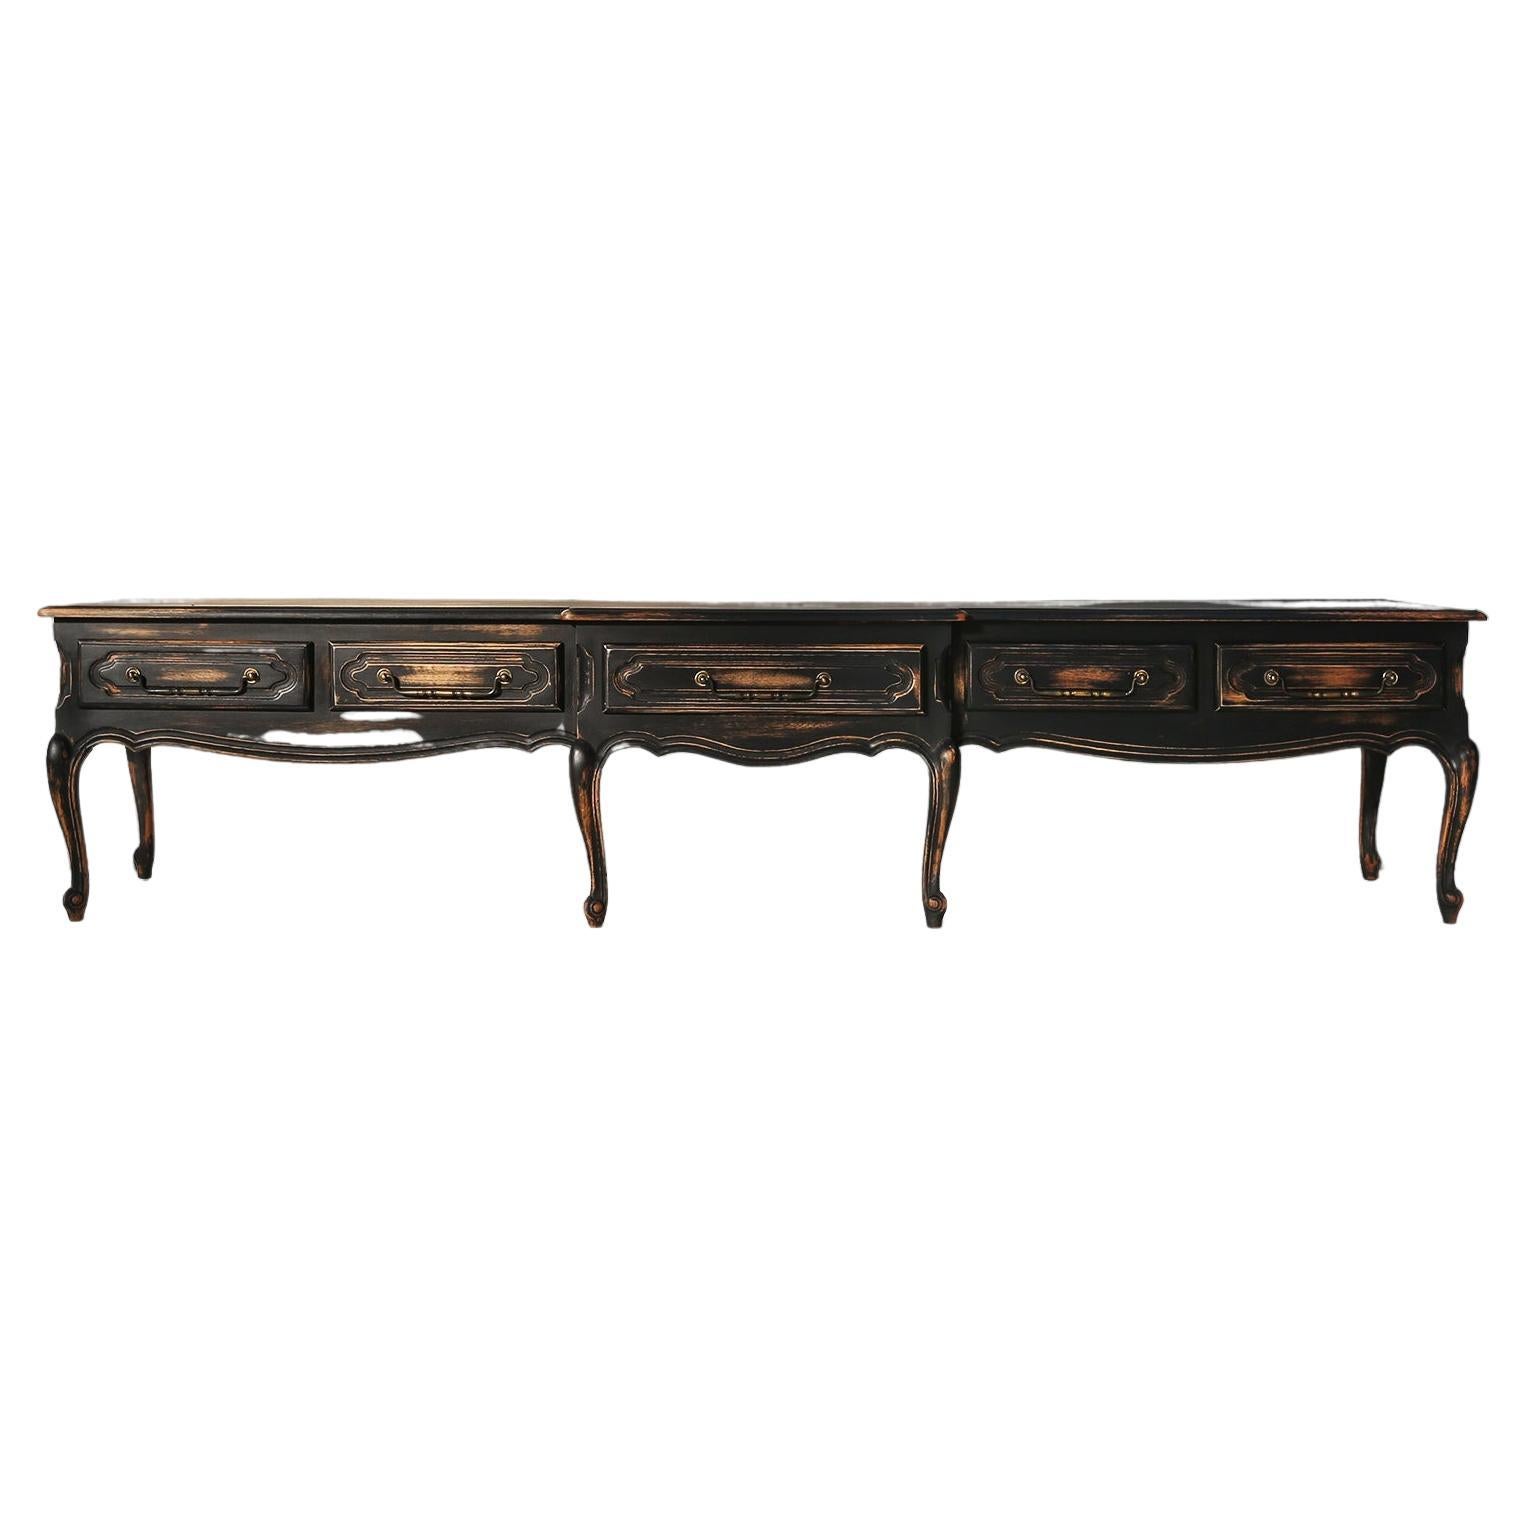 This Louis XIV-style sideboard is a unique and stylish piece of furniture that takes any interior to the next level. It is inspired by the French king who was known for his luxurious and artistic taste. It has a classic and timeless look that